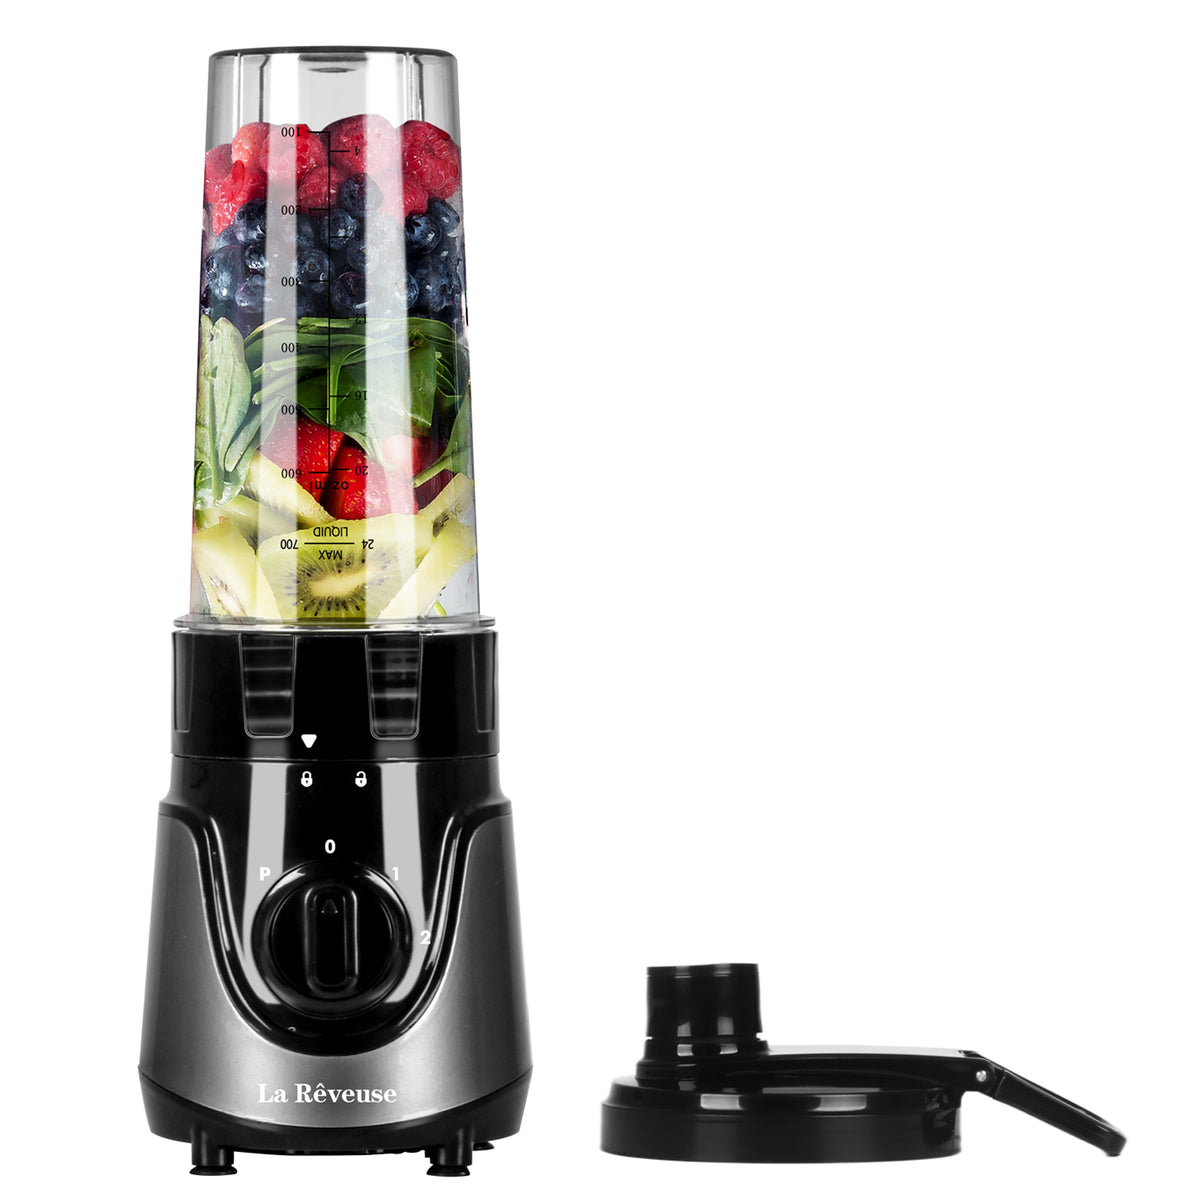 LARB1803s La Reveuse Personal Smoothie Blender 600 Watts with 20